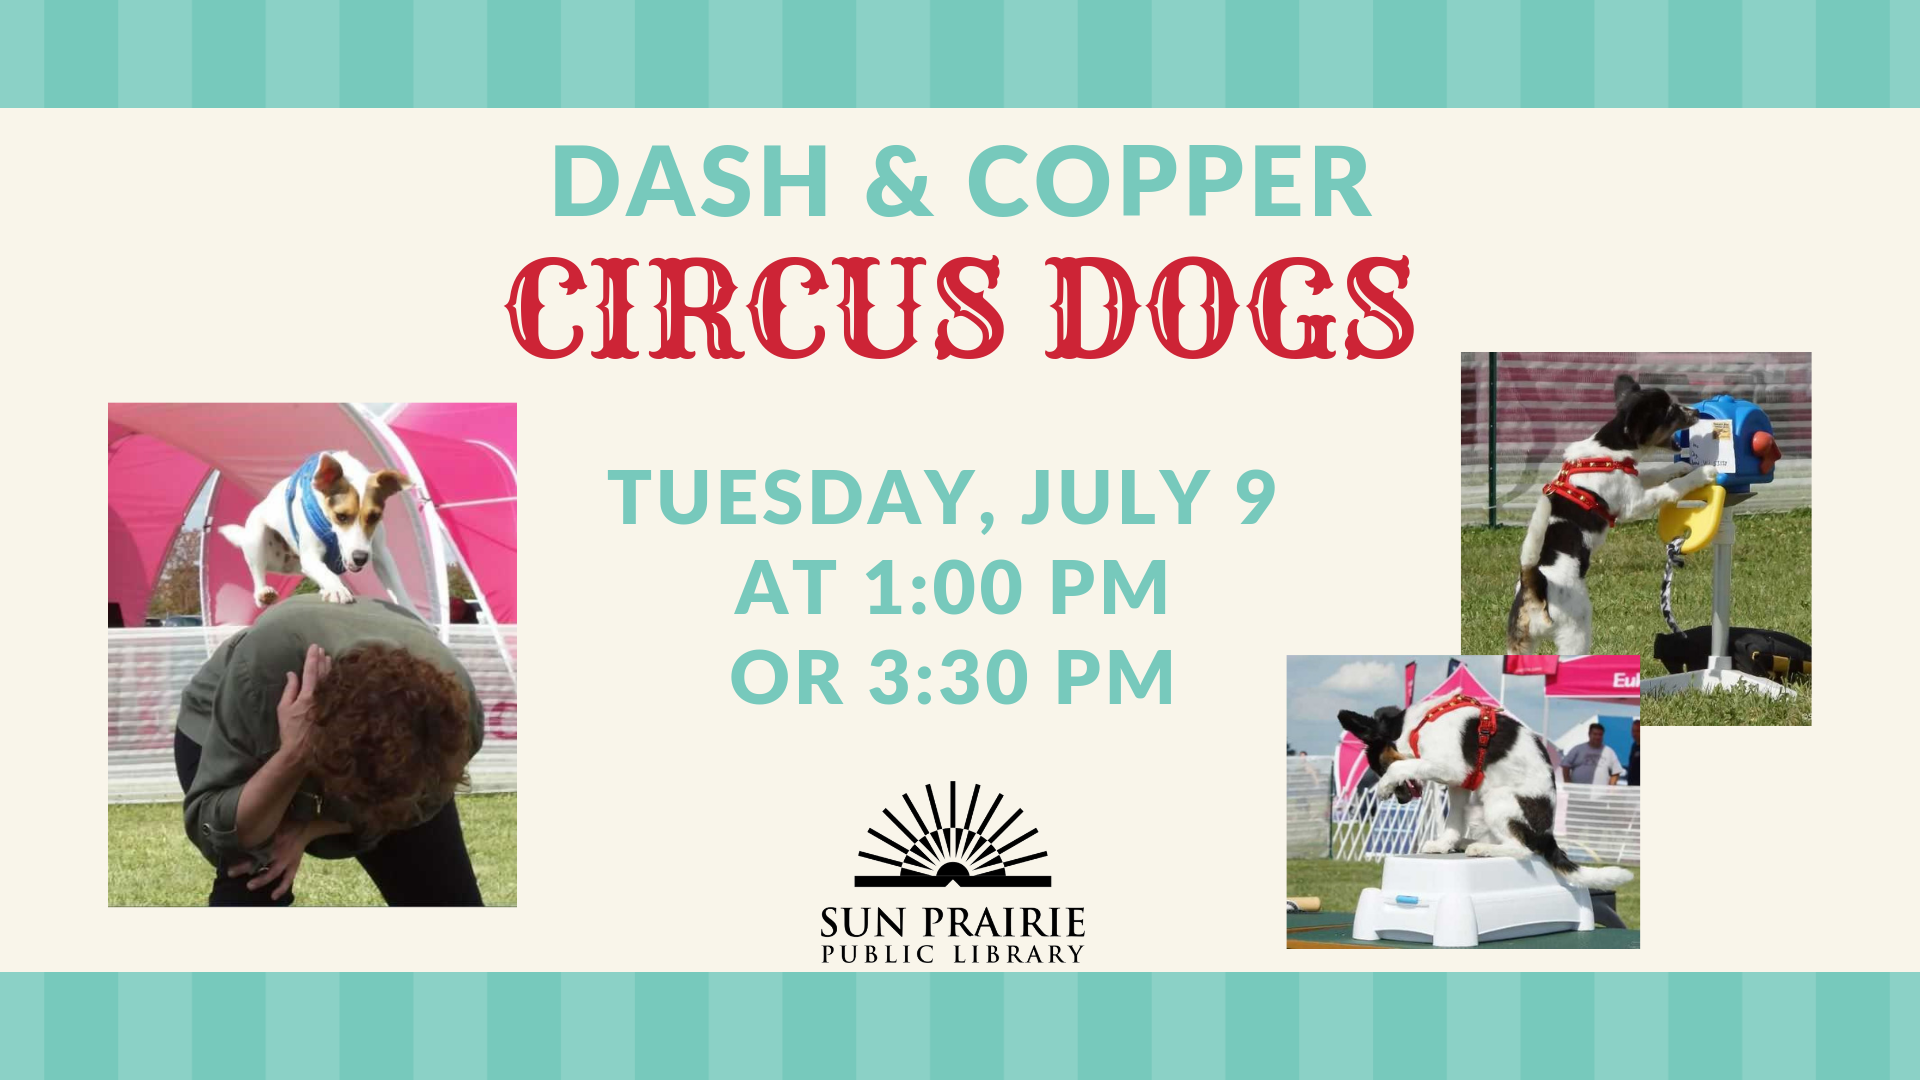 Circus Dogs, Dash & Copper with time and date of event